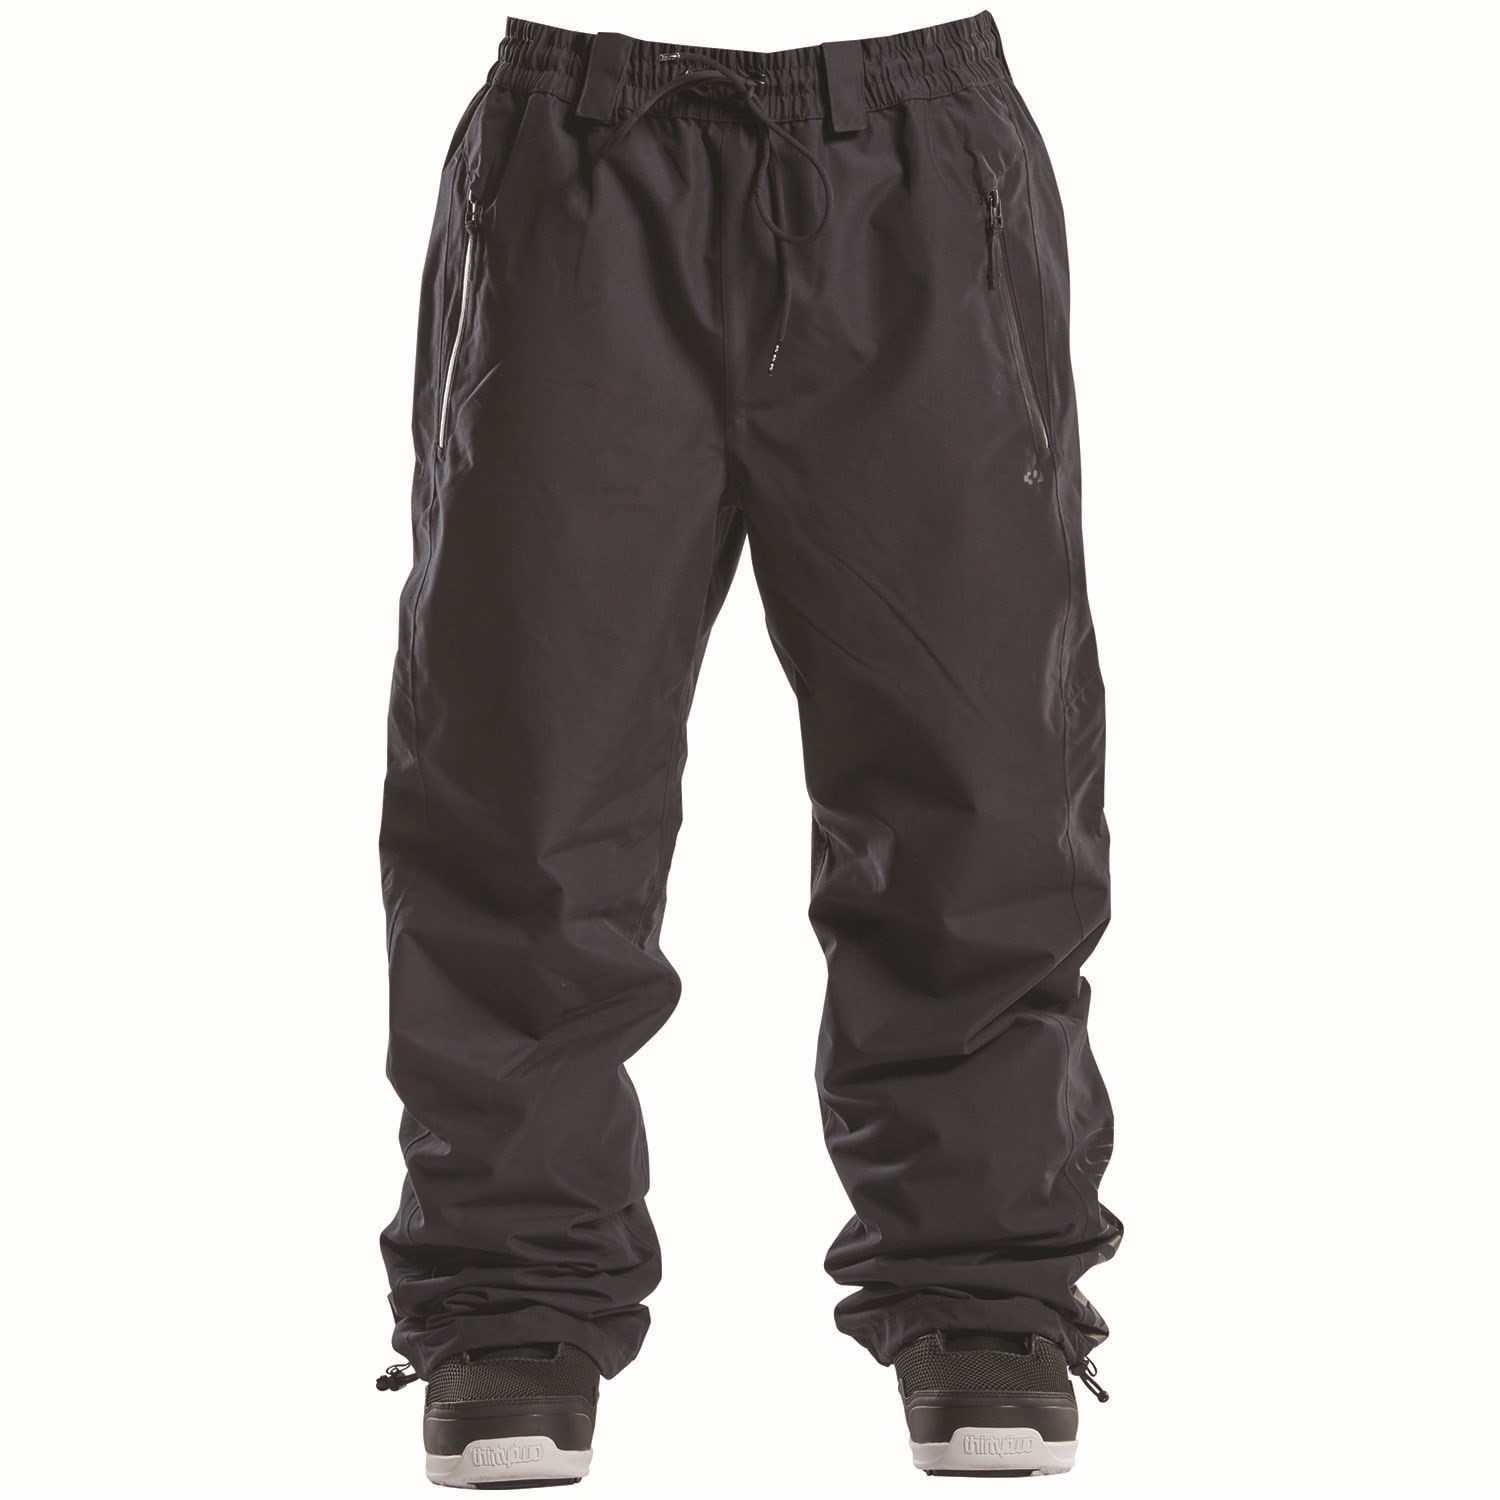 Thirtytwo Sweeper Snowboard Pant Graphite 2020 